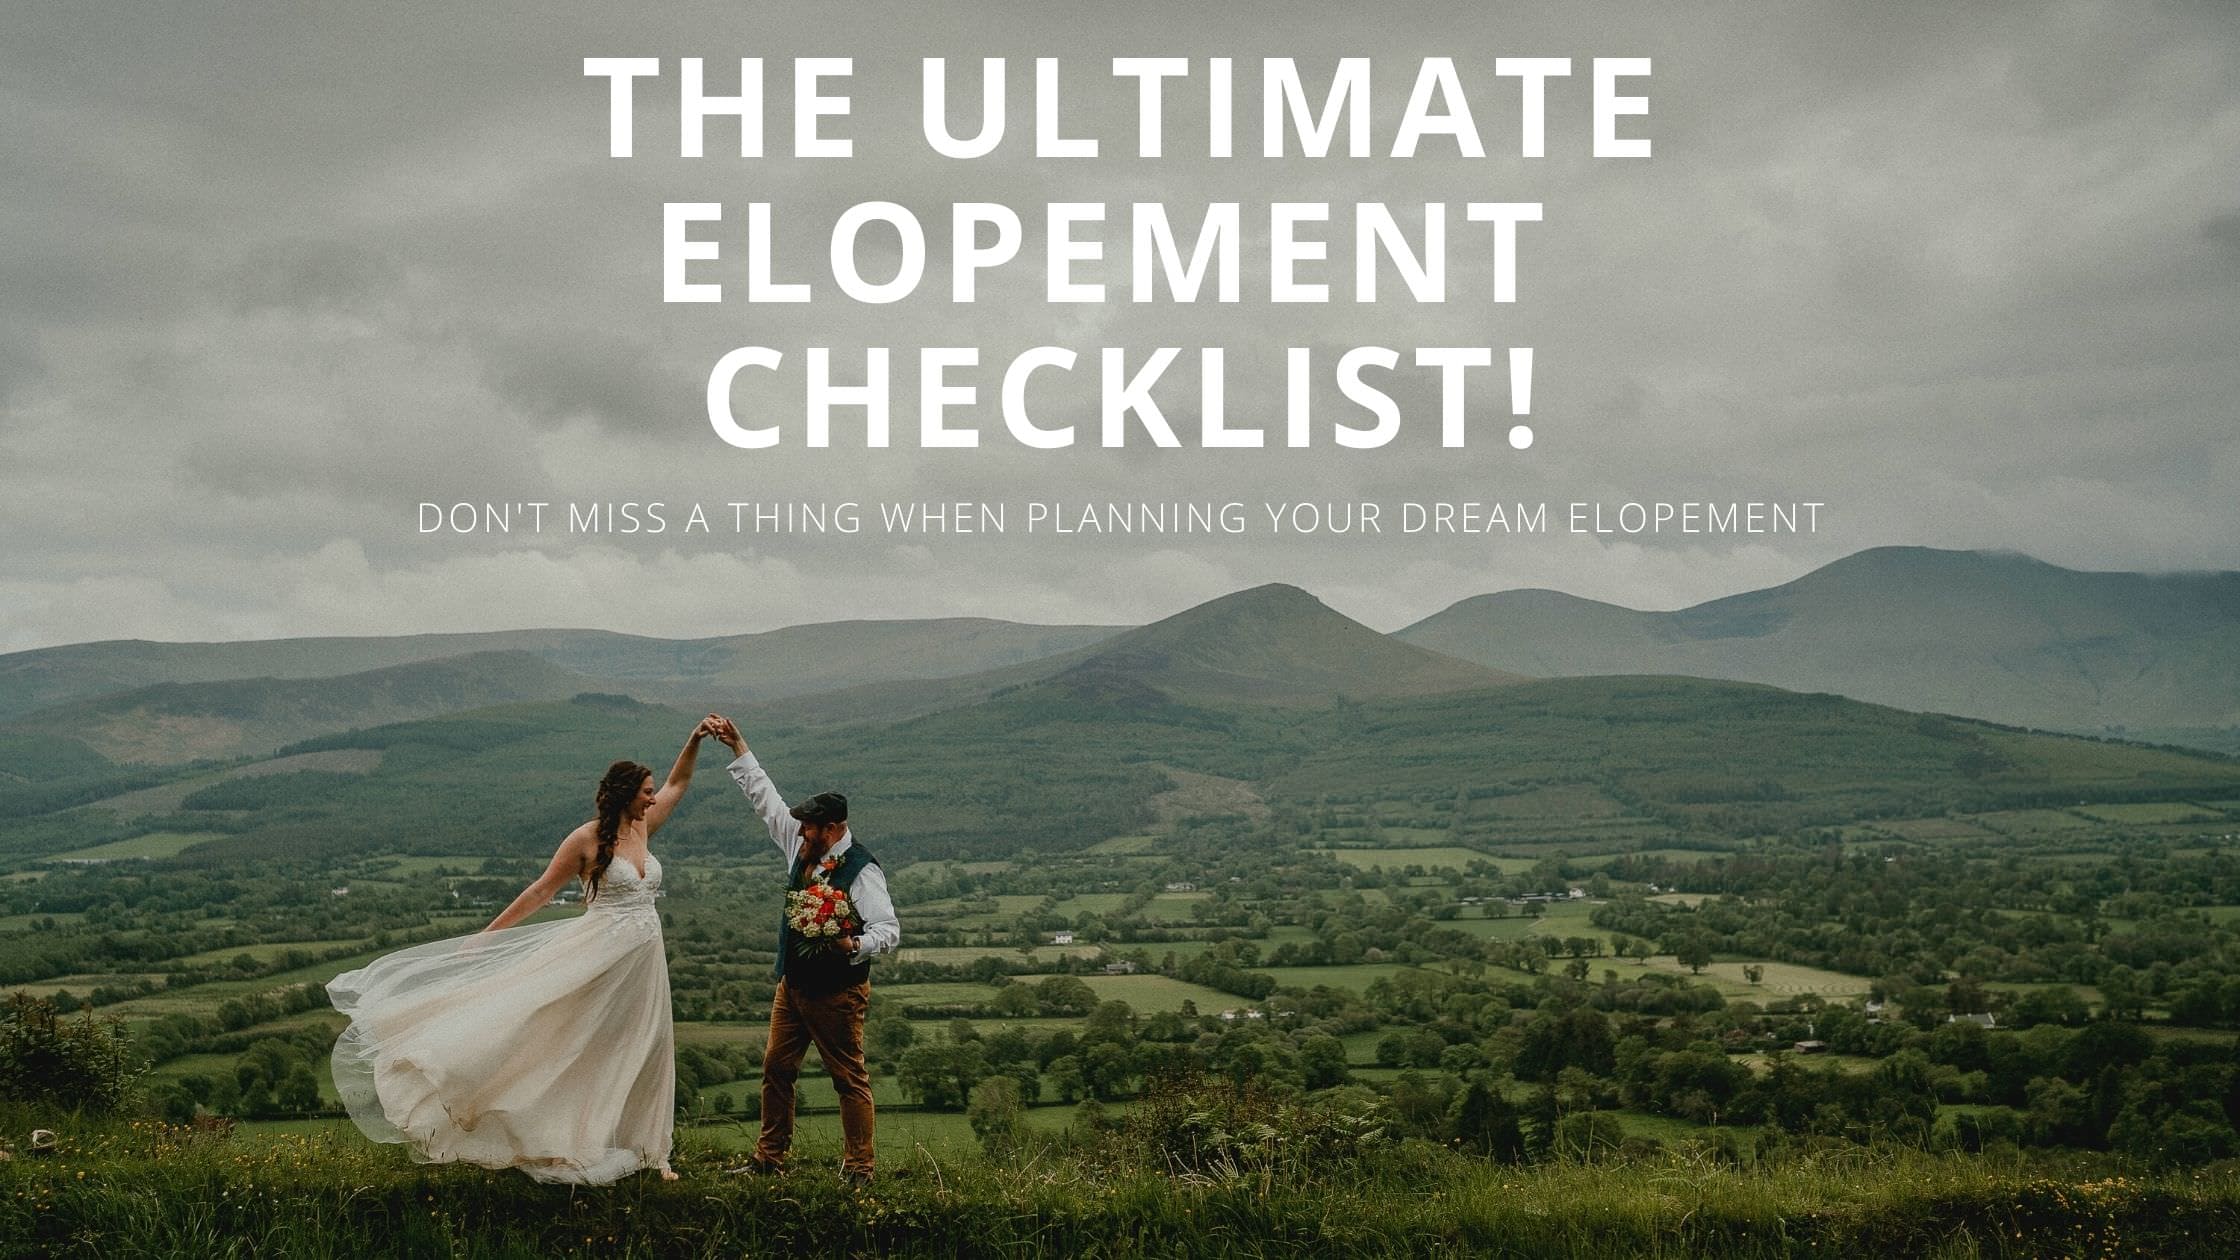 The ultimate elopement checklist to help you plan your dream elopement